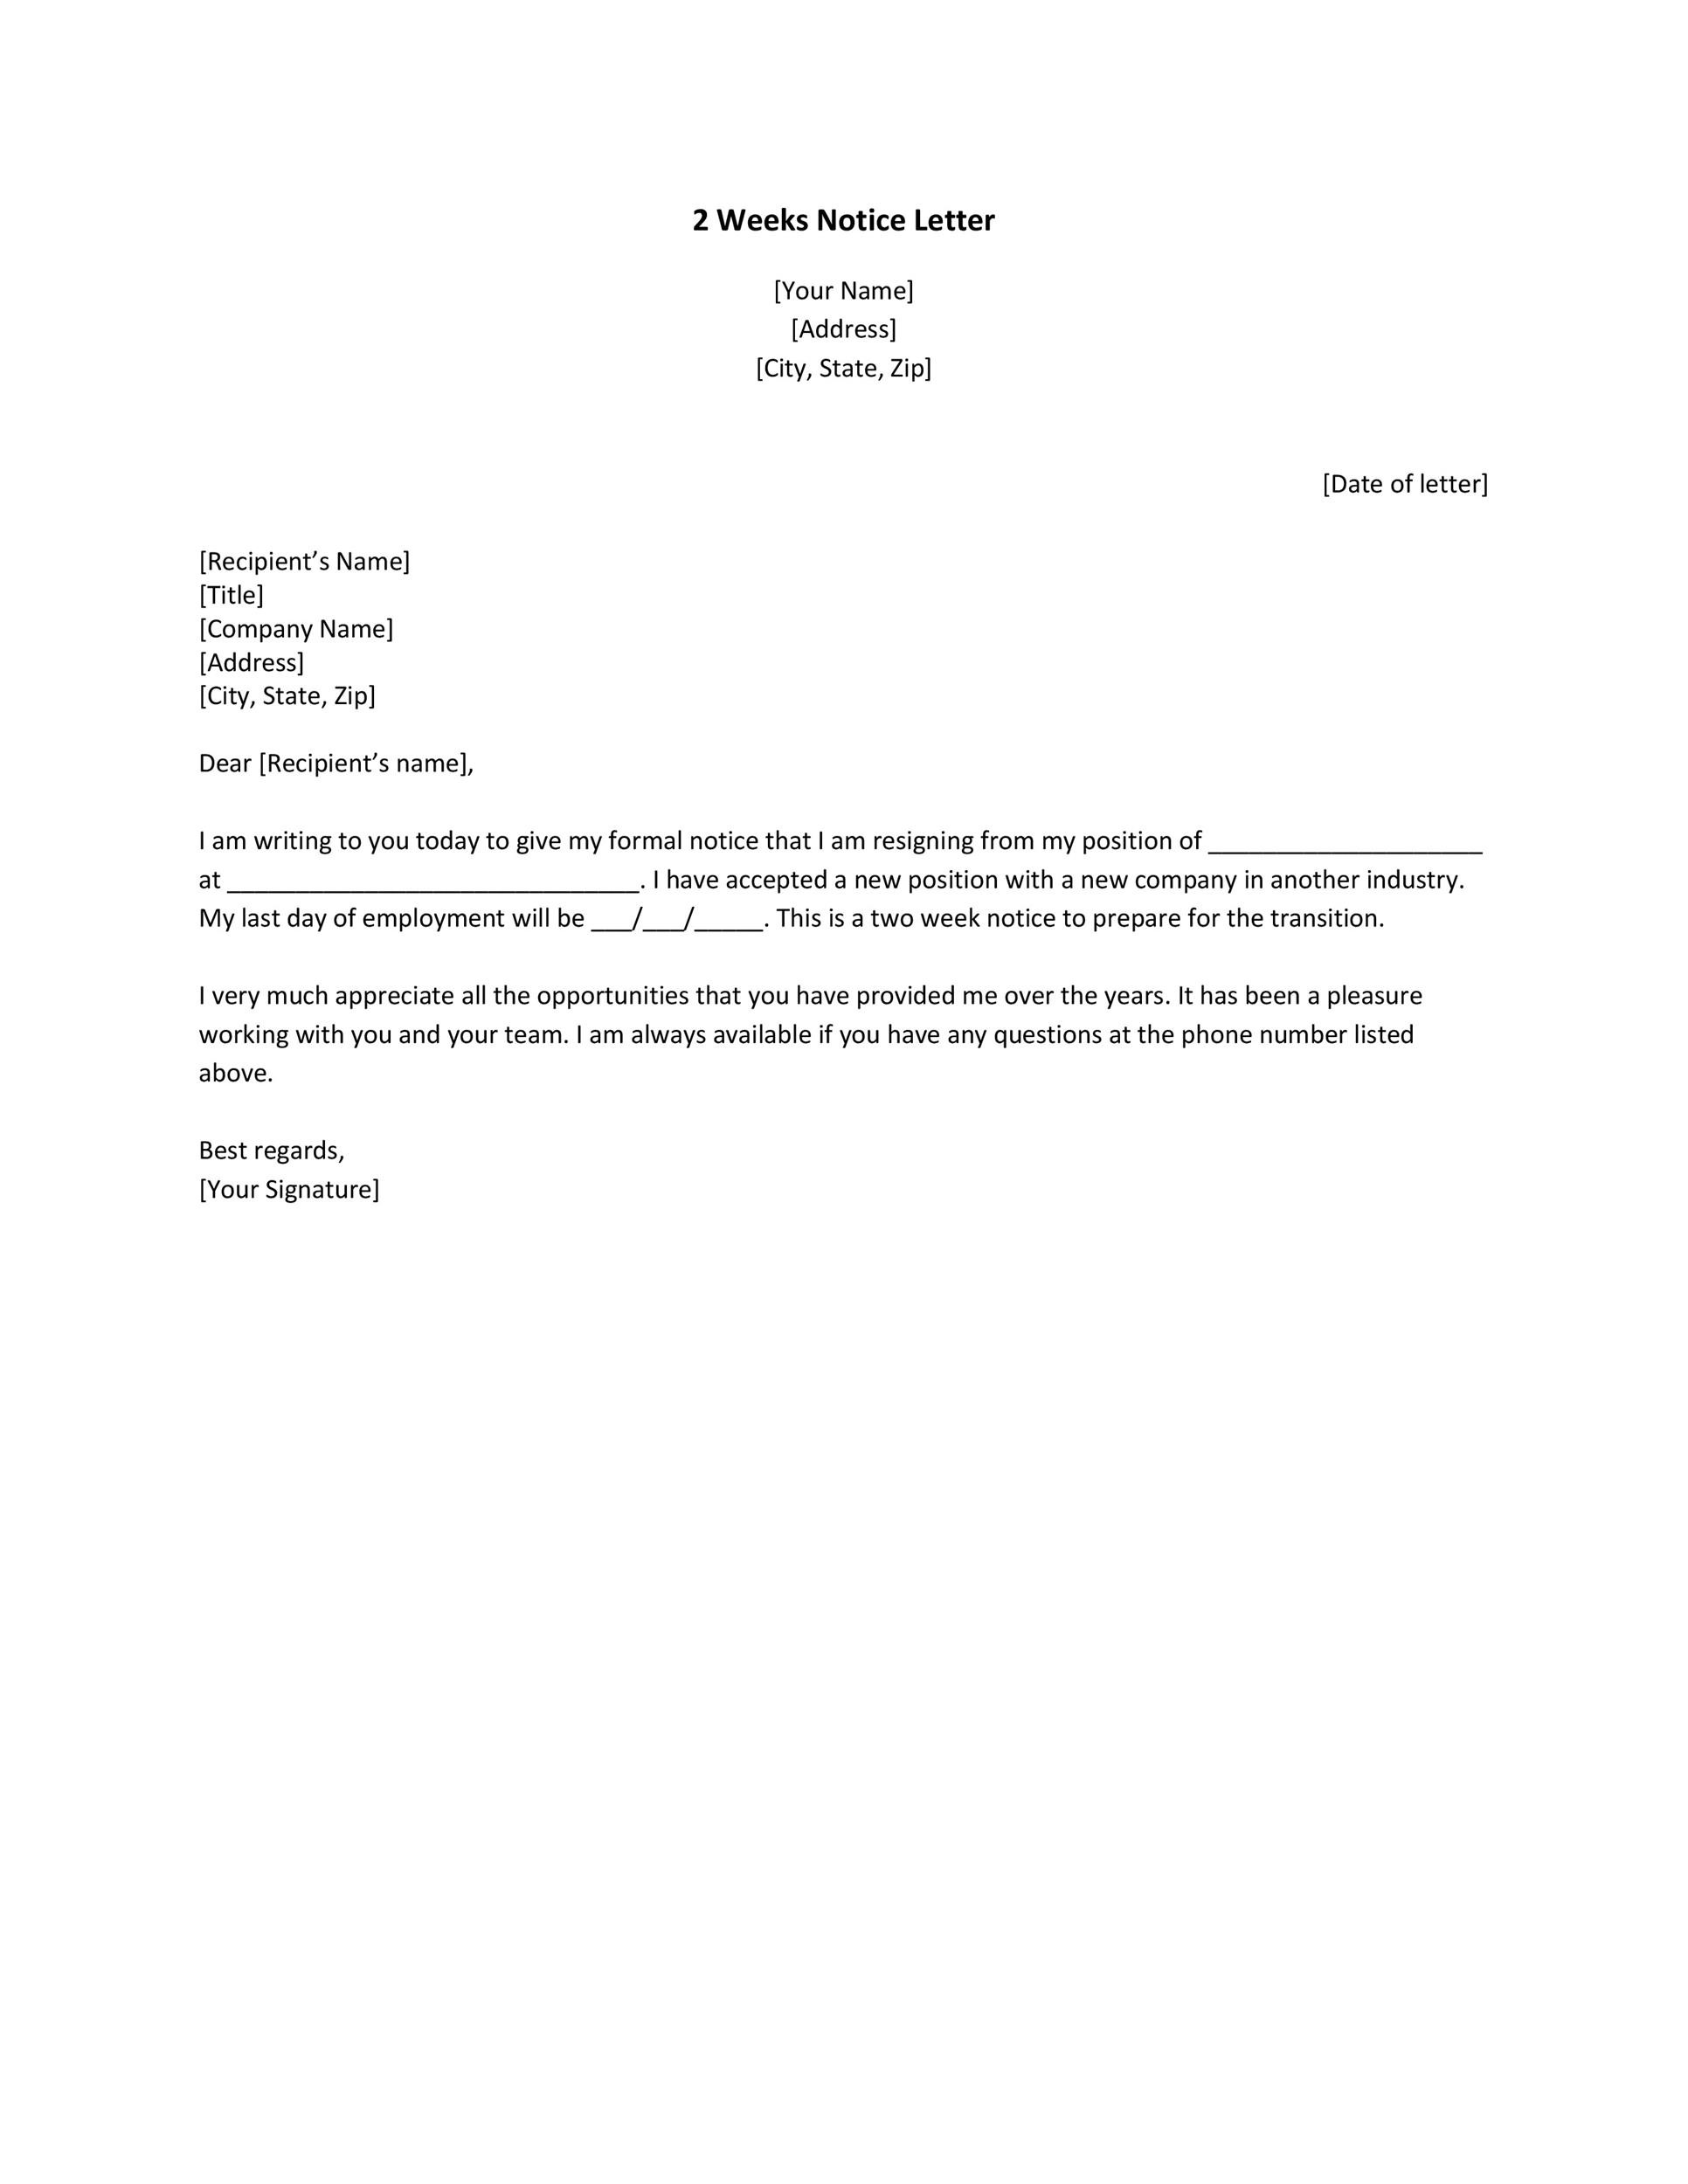 A Good Two Weeks Notice Letter from templatelab.com